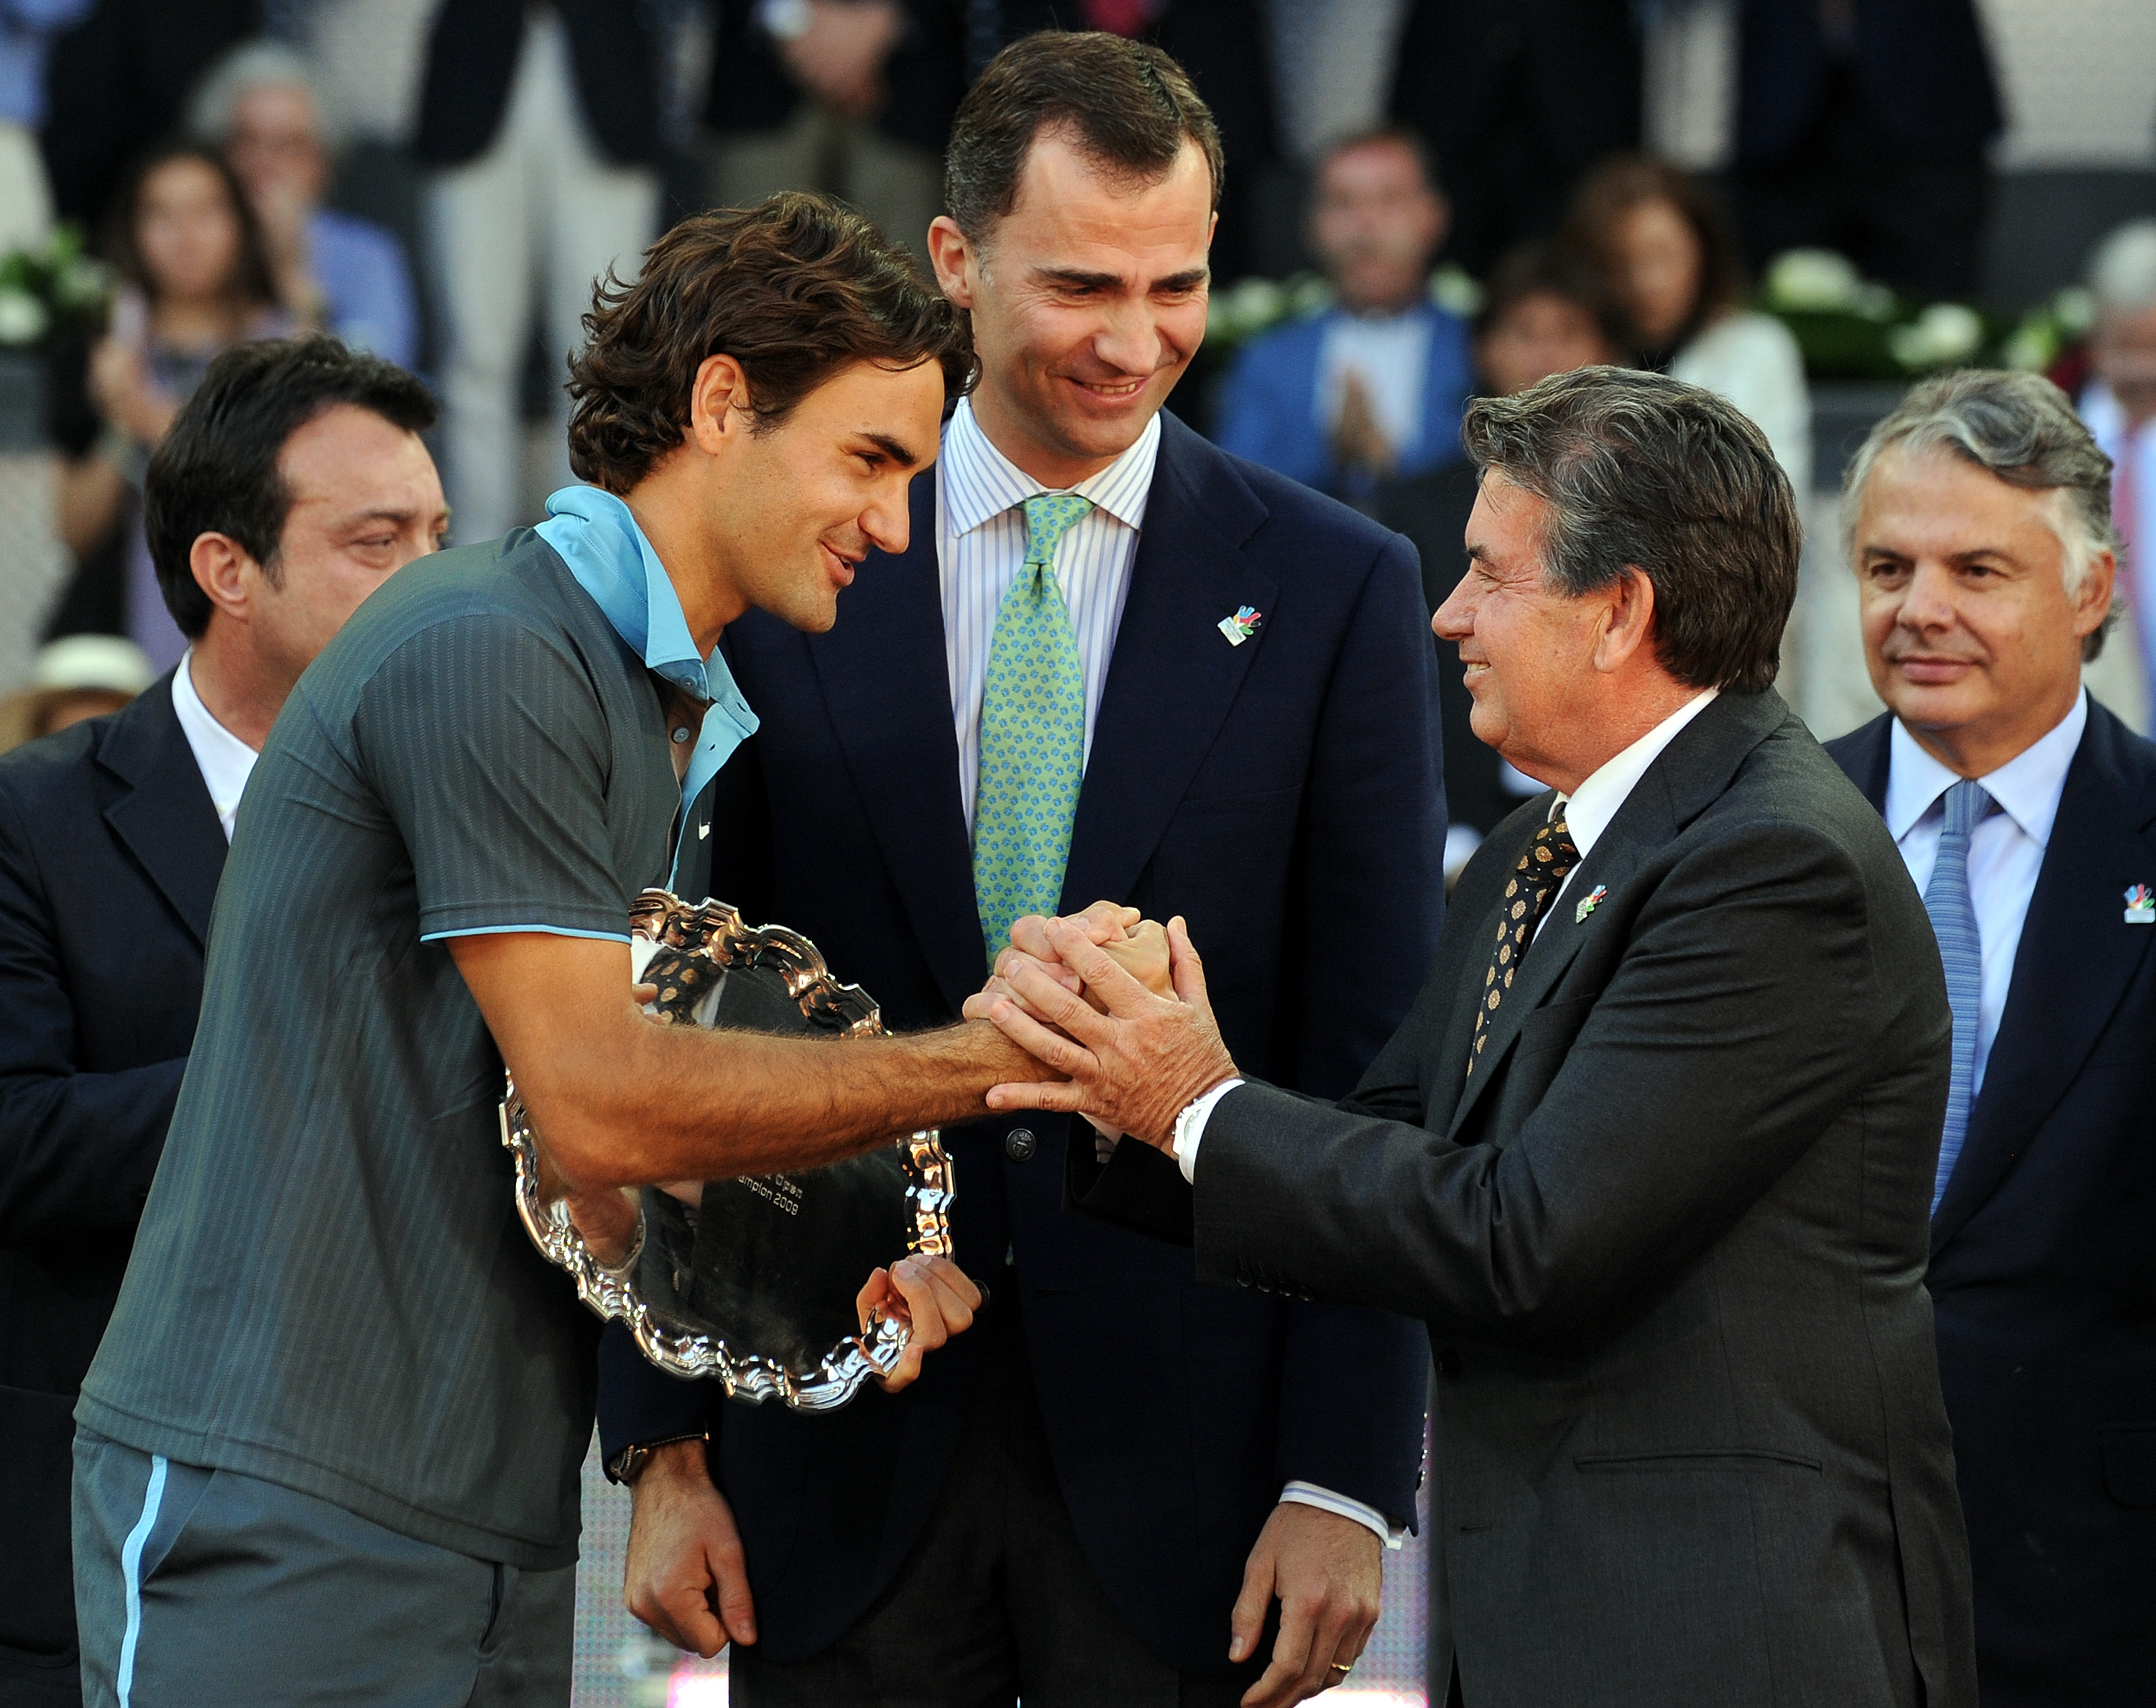 MADRID, SPAIN - MAY 17:  Roger Federer (L) of Switzerland is greeted by  former tennis great Manolo Santana (R) flanked by Crown Prince Felipe (C) of Spain after his straight set victory against Rafael Nadal of Spain during the final of the Madrid Open te